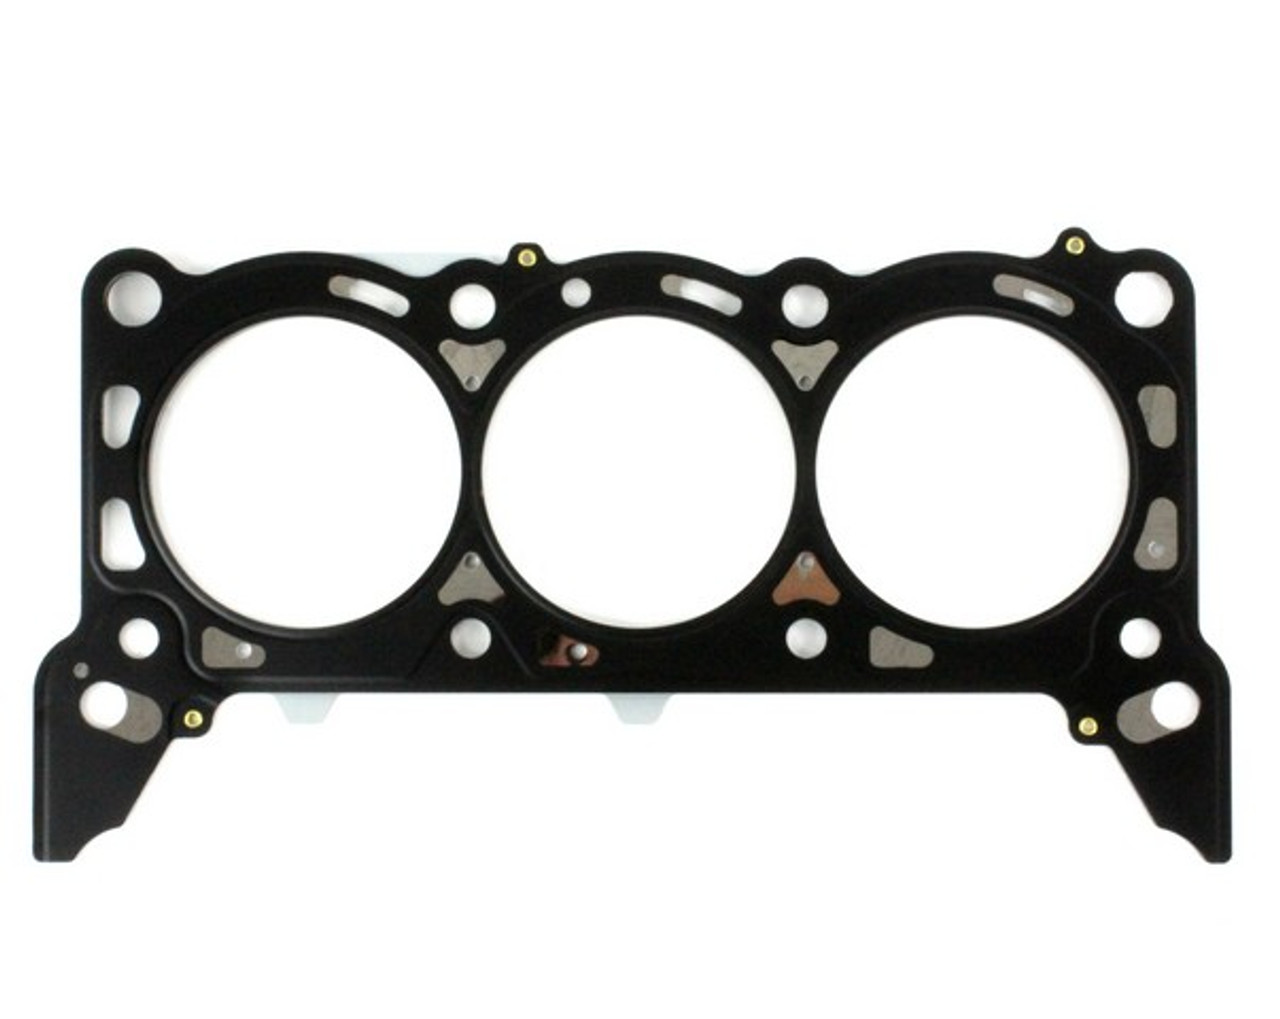 Head Gasket 3.8L 2000 Ford Mustang - HG4123R.44